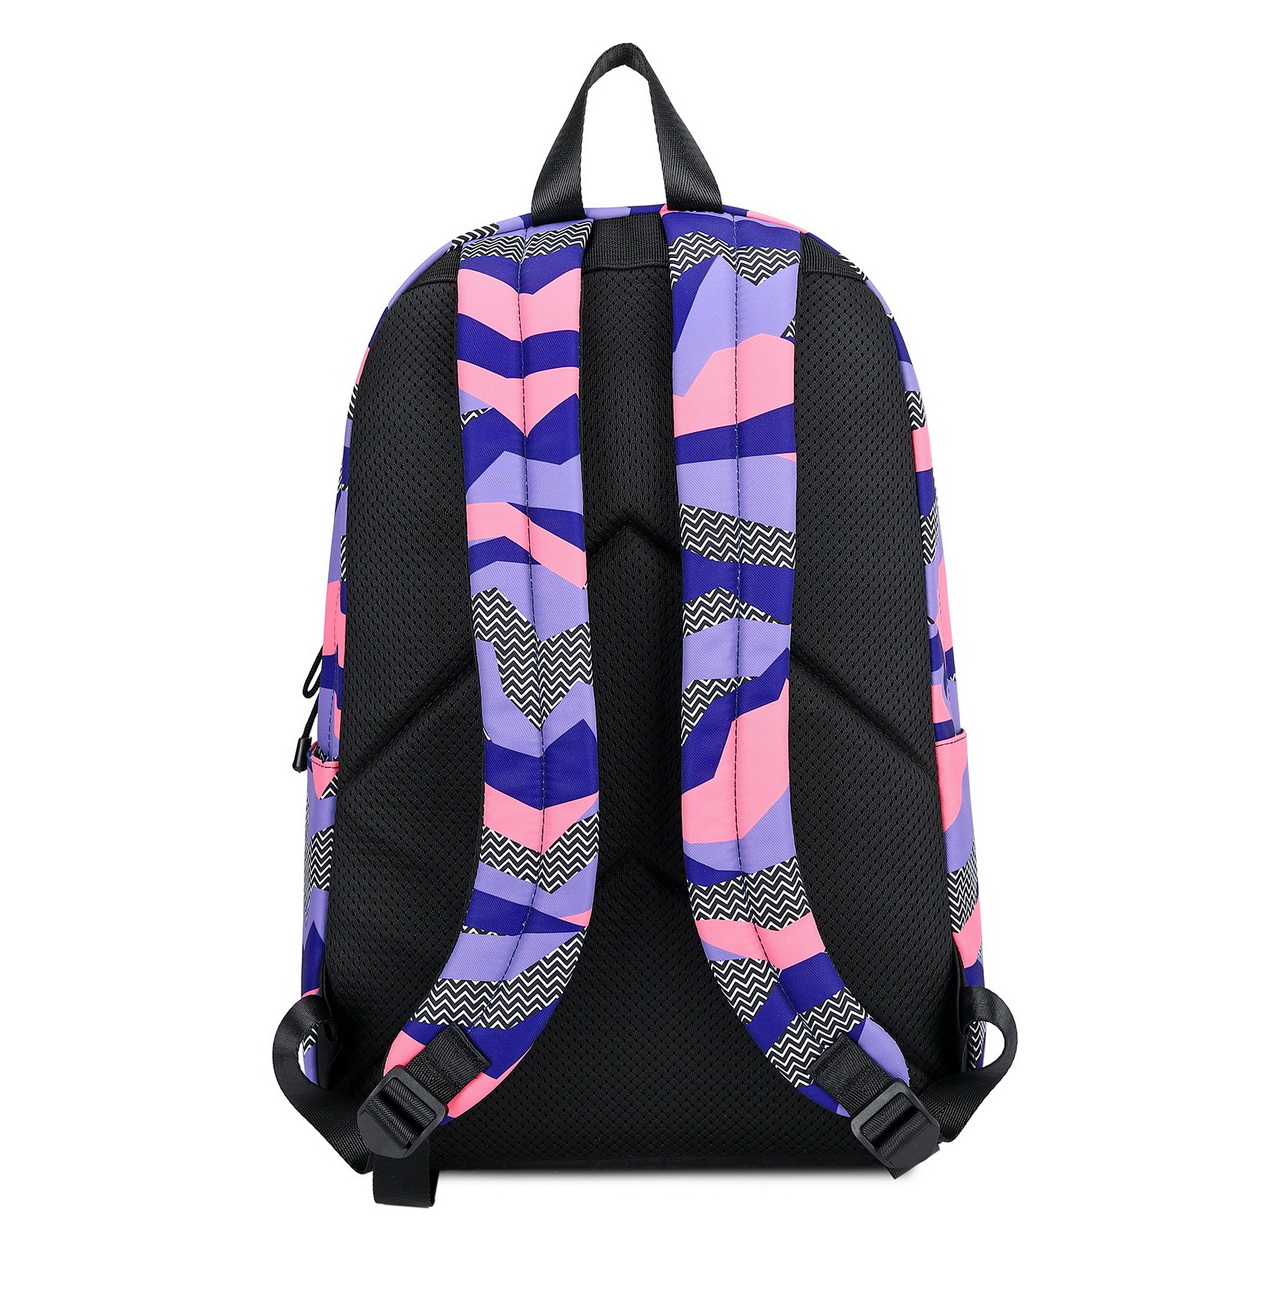 QMAILX Waterproof Fashion Printed Backpack for Girl